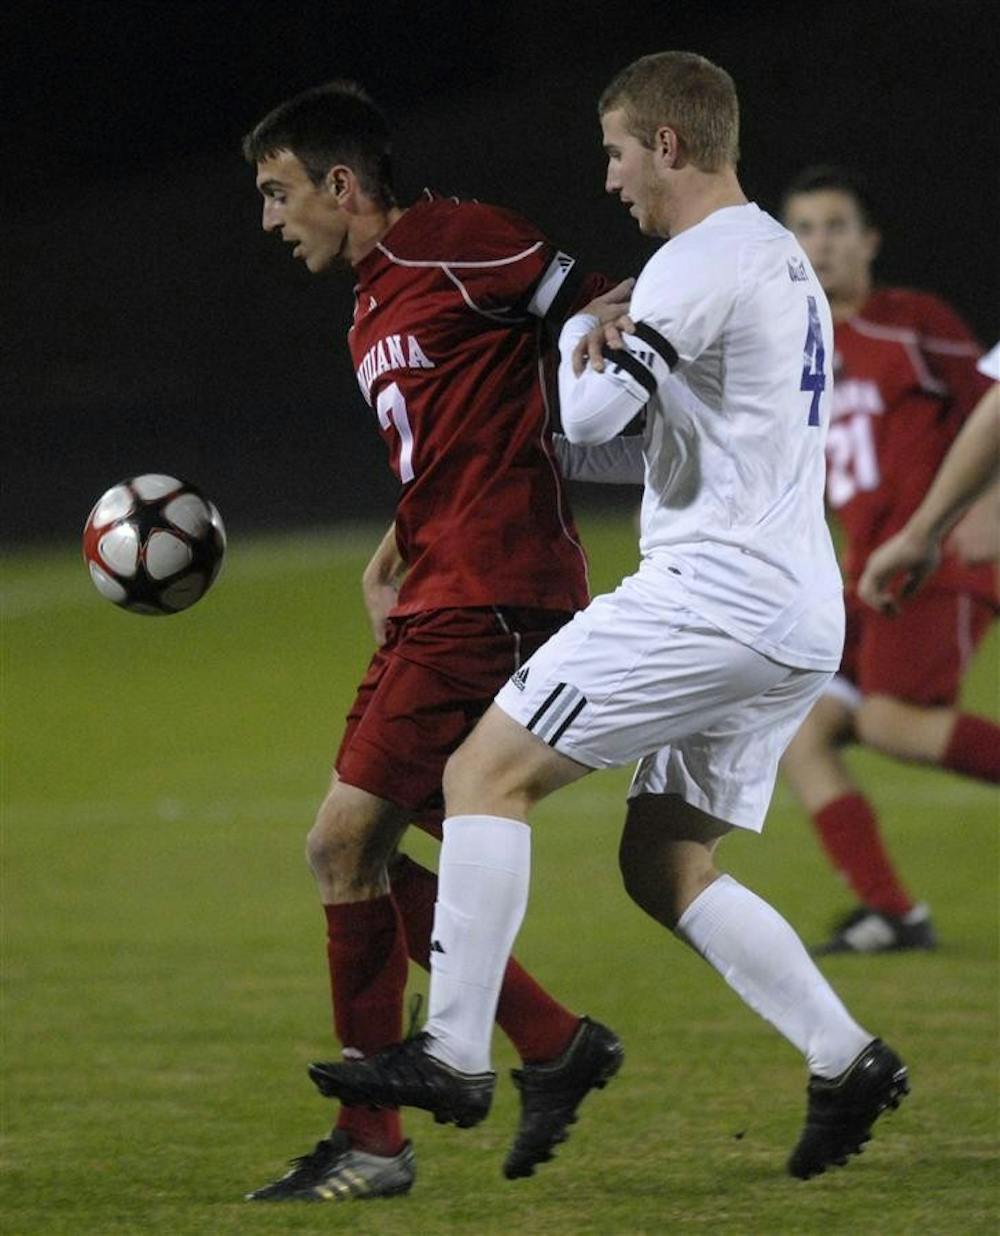 Senior midfielder Eric Alexander protects the ball from Evansville's Dan Gibson during the first half of the Hoosier's game against the Purple Aces Wednesday evening at Bill Armstrong Stadium. Both teams remain scoreless ten minutes into the second half.